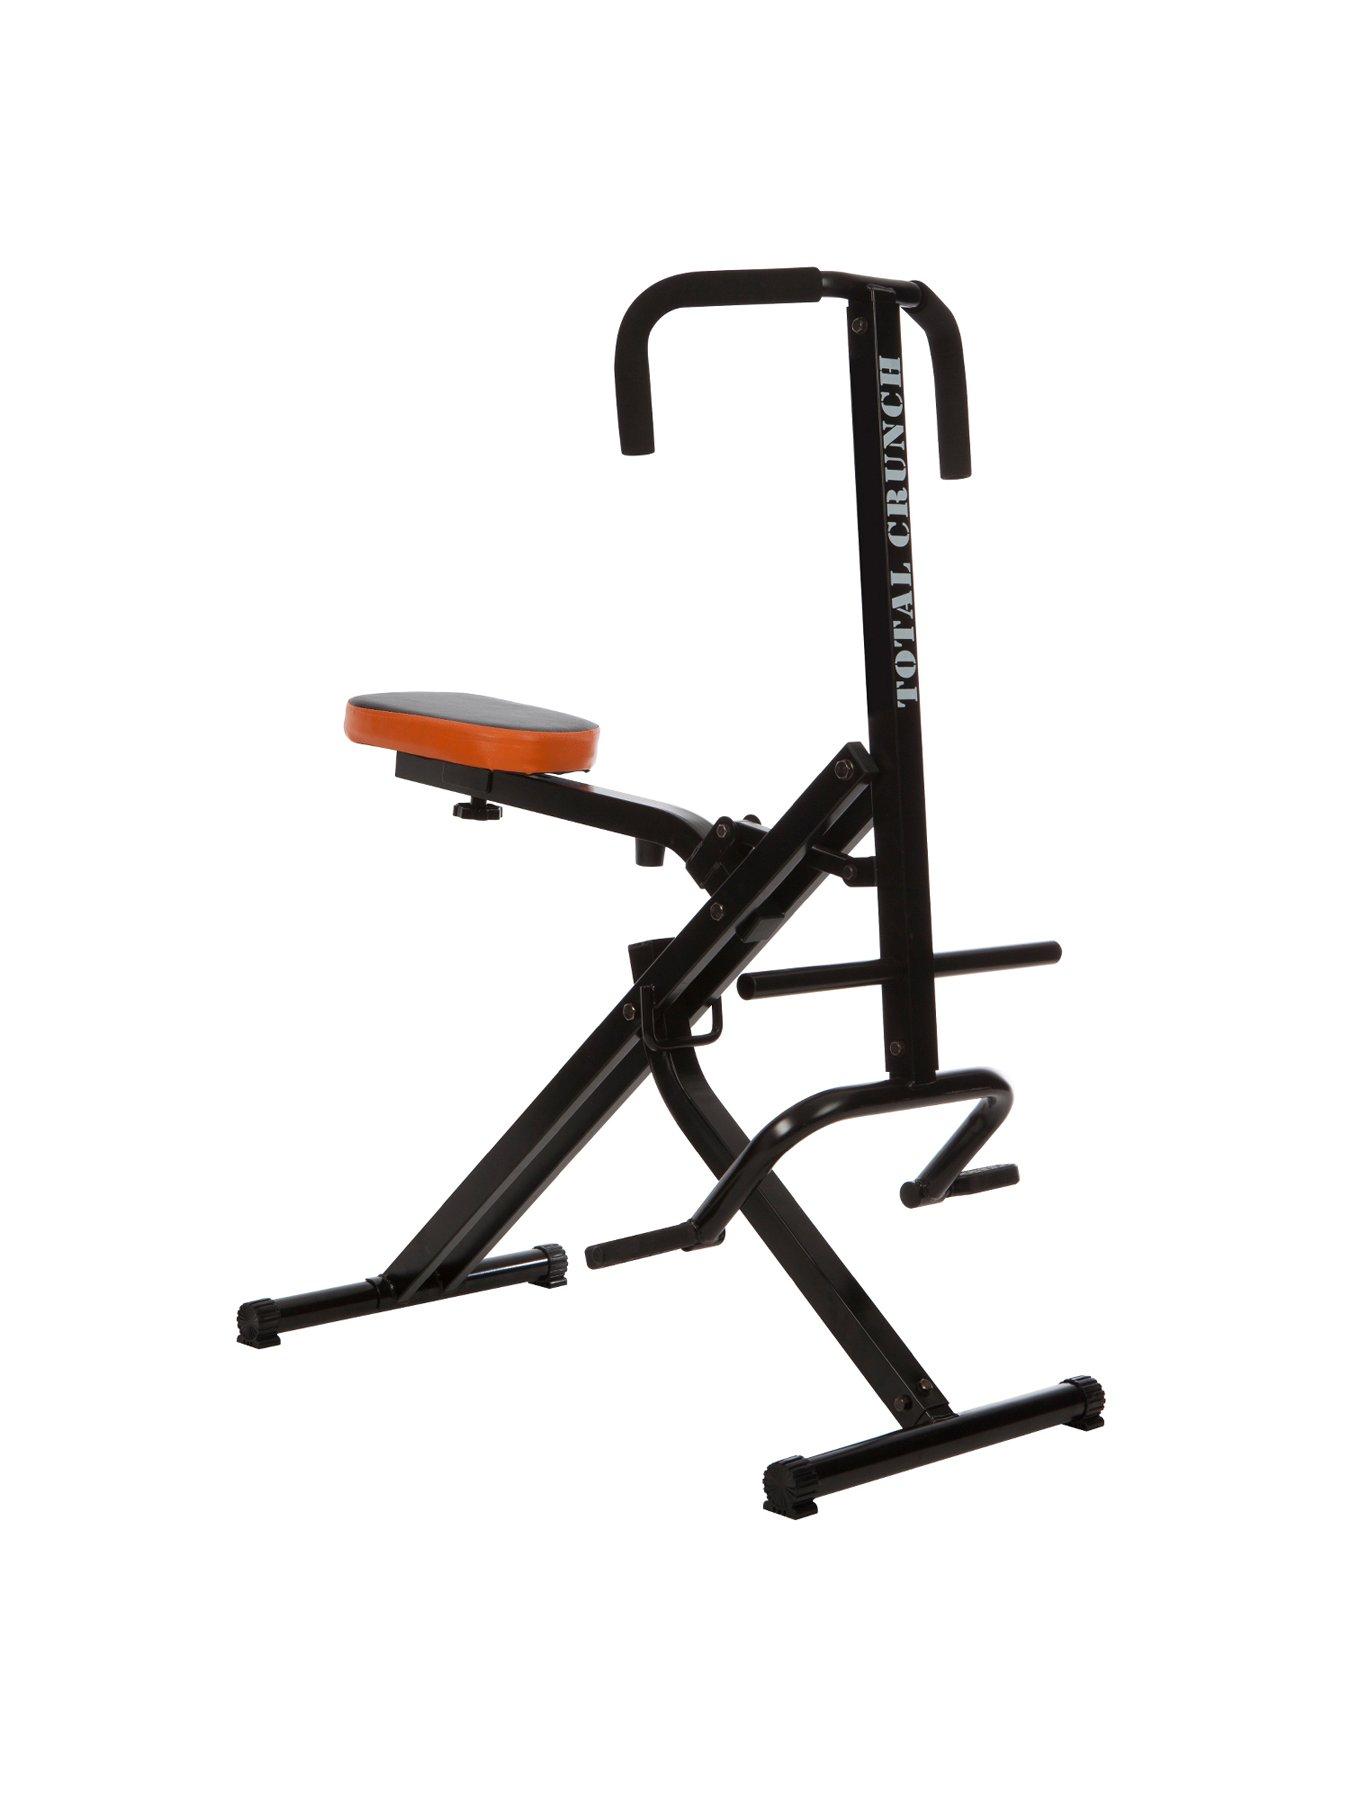 JML Total Crunch Whole Body Workout Exercise Machine